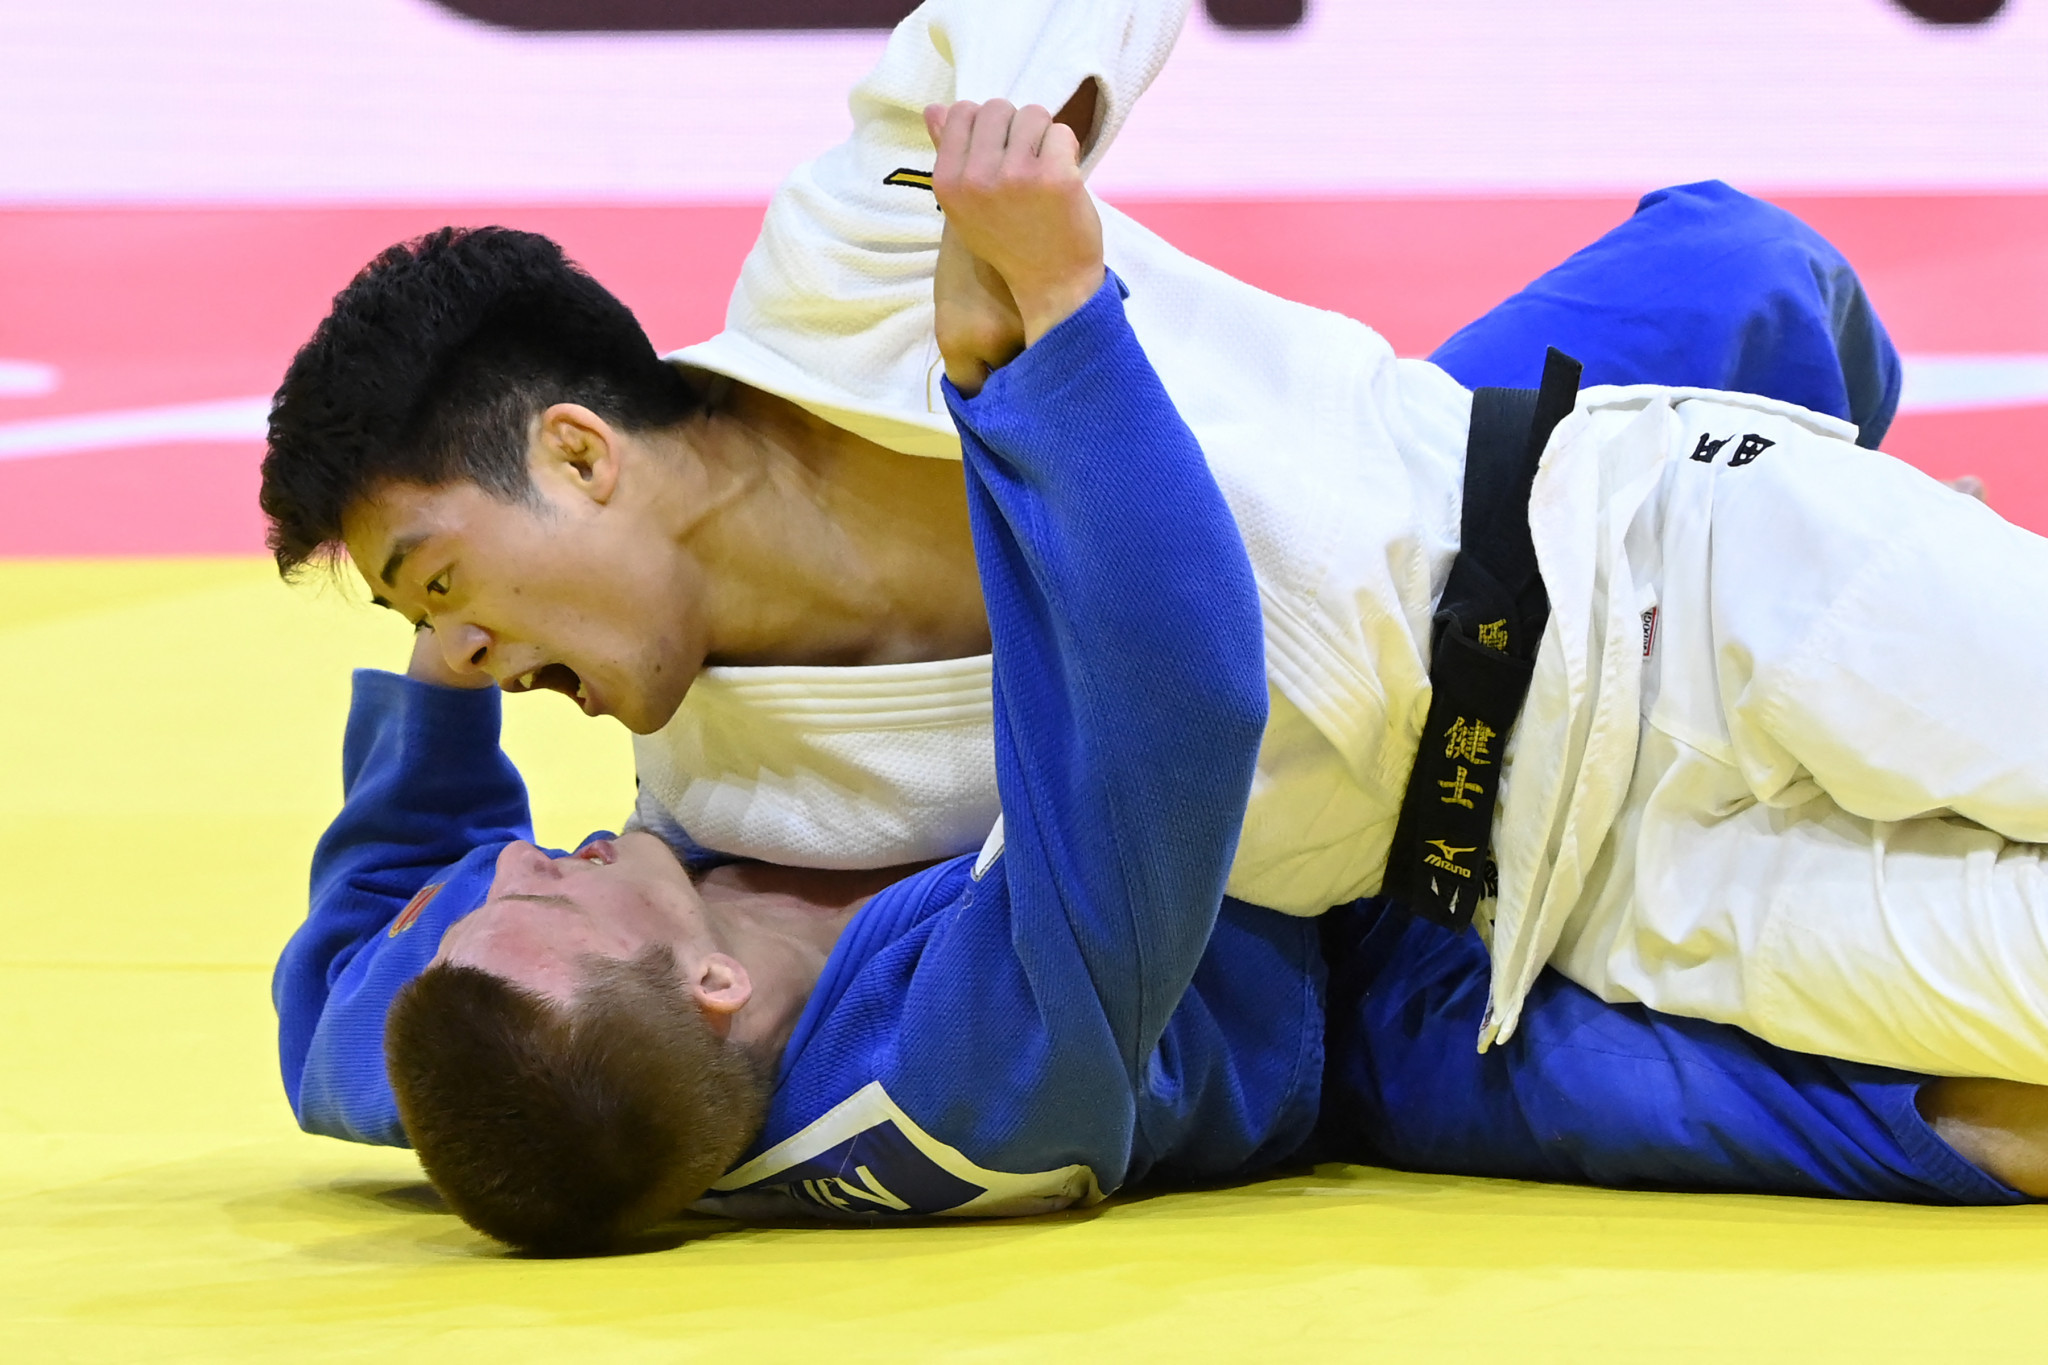 Japan's Kenshi Harada, in white, defeats the Russia Judo Federation's Ayub Khazhaliev in the semi-finals of the mixed team competition, helping Japan march to the final ©Getty Images